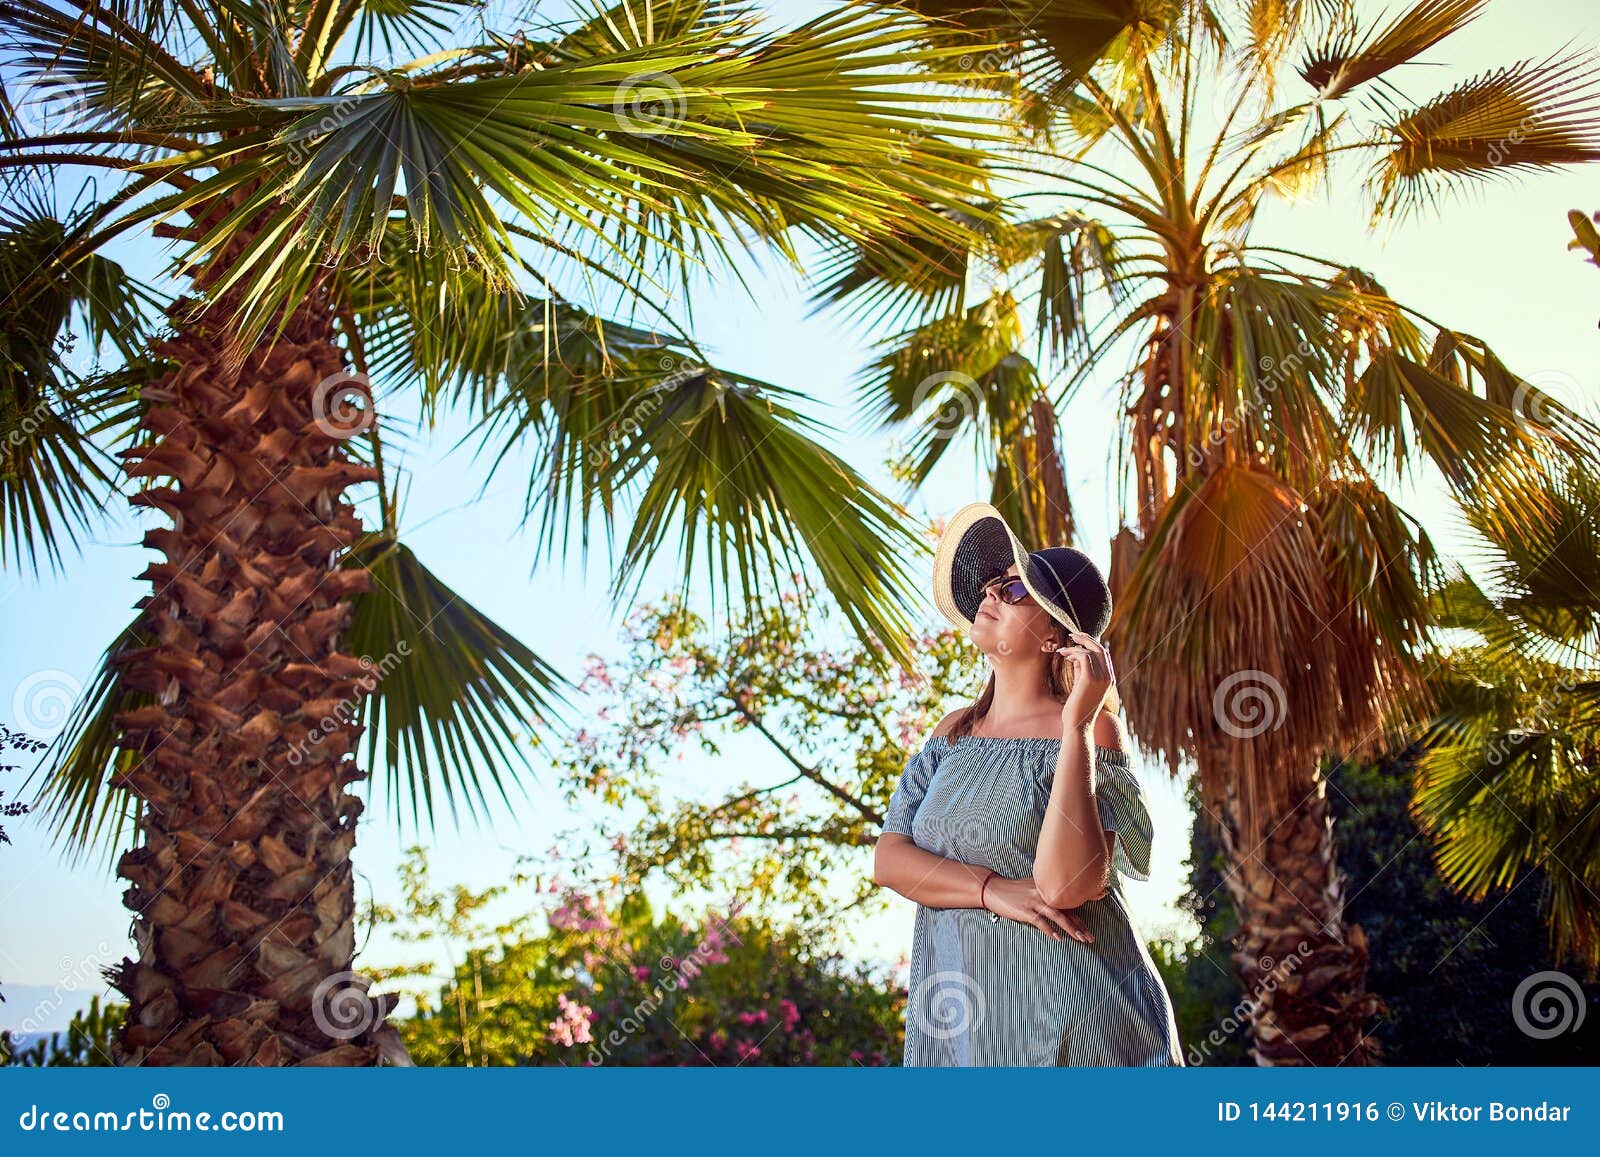 Young woman lying in hammock under palm tree on beach 